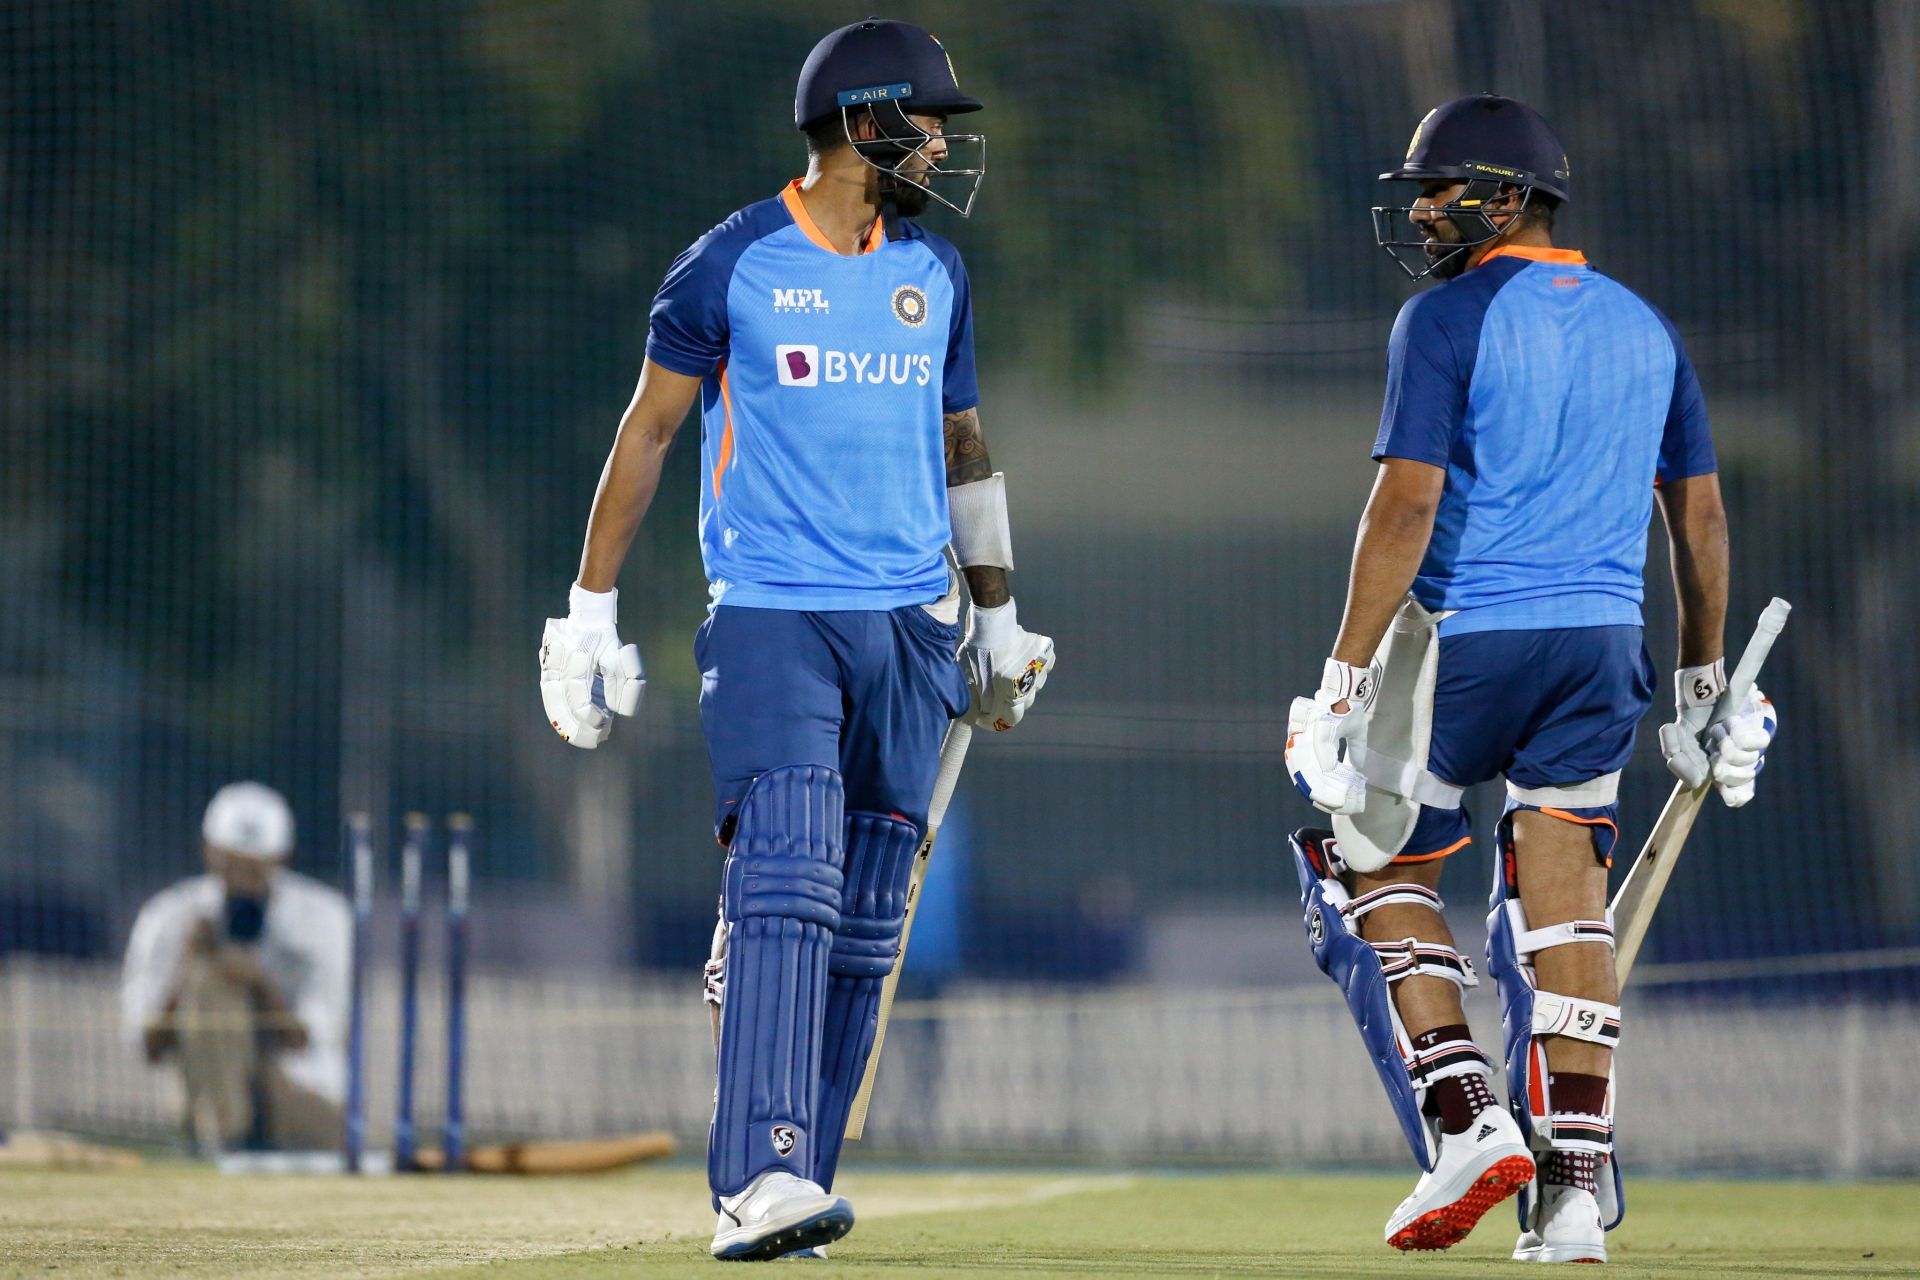 Rohit Sharma (Captain) with his opening partner KL Rahul (Vice-captain) during the practice session.